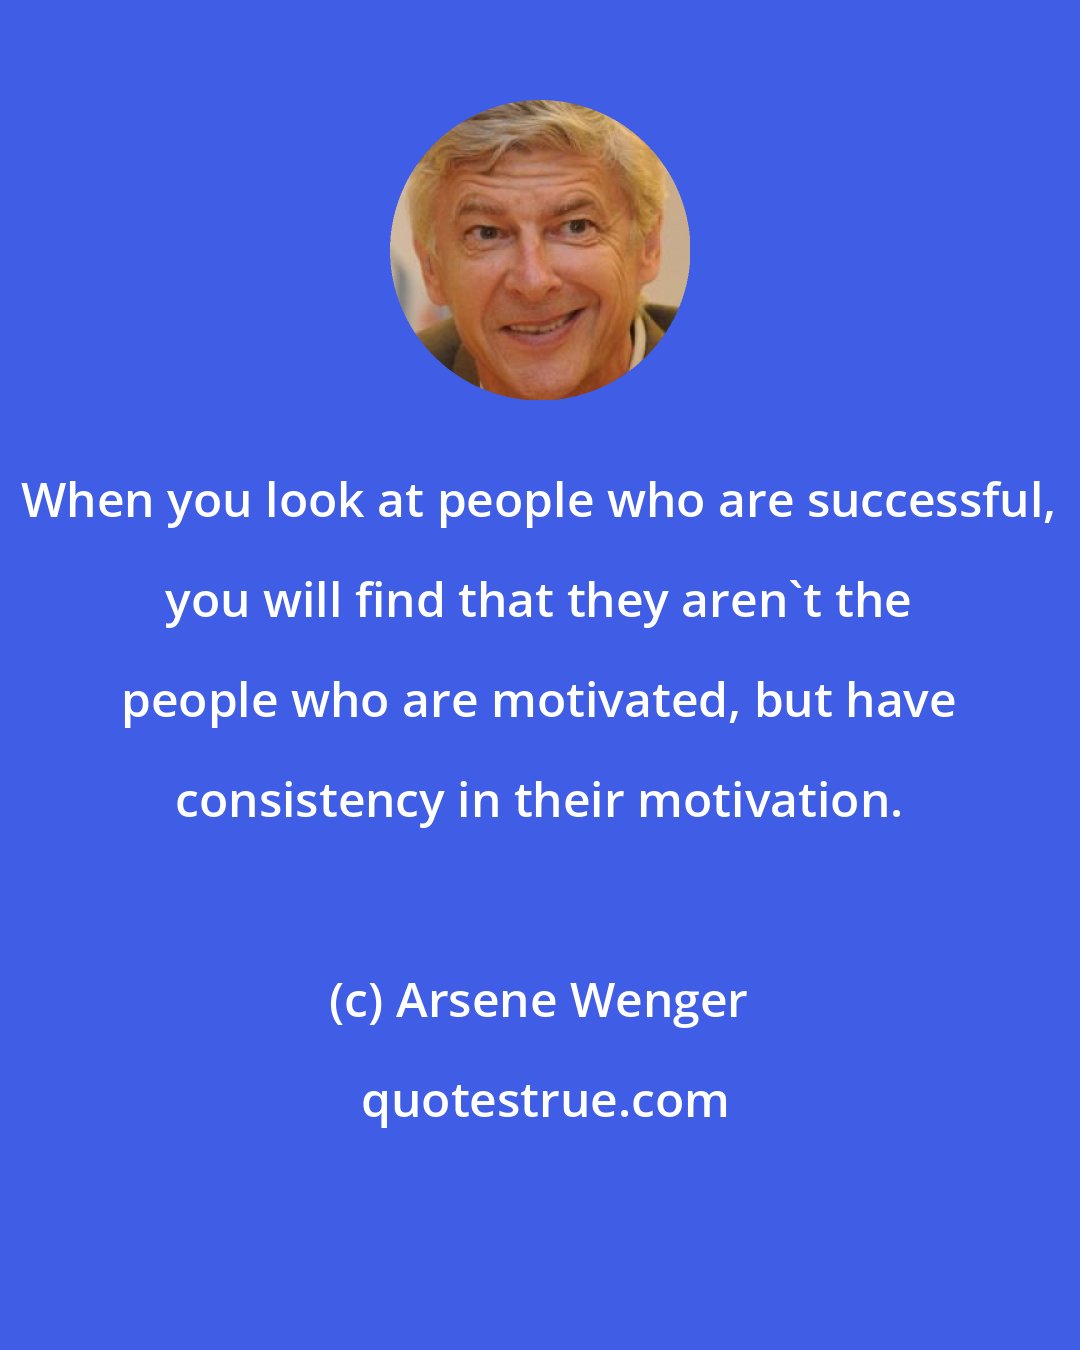 Arsene Wenger: When you look at people who are successful, you will find that they aren't the people who are motivated, but have consistency in their motivation.